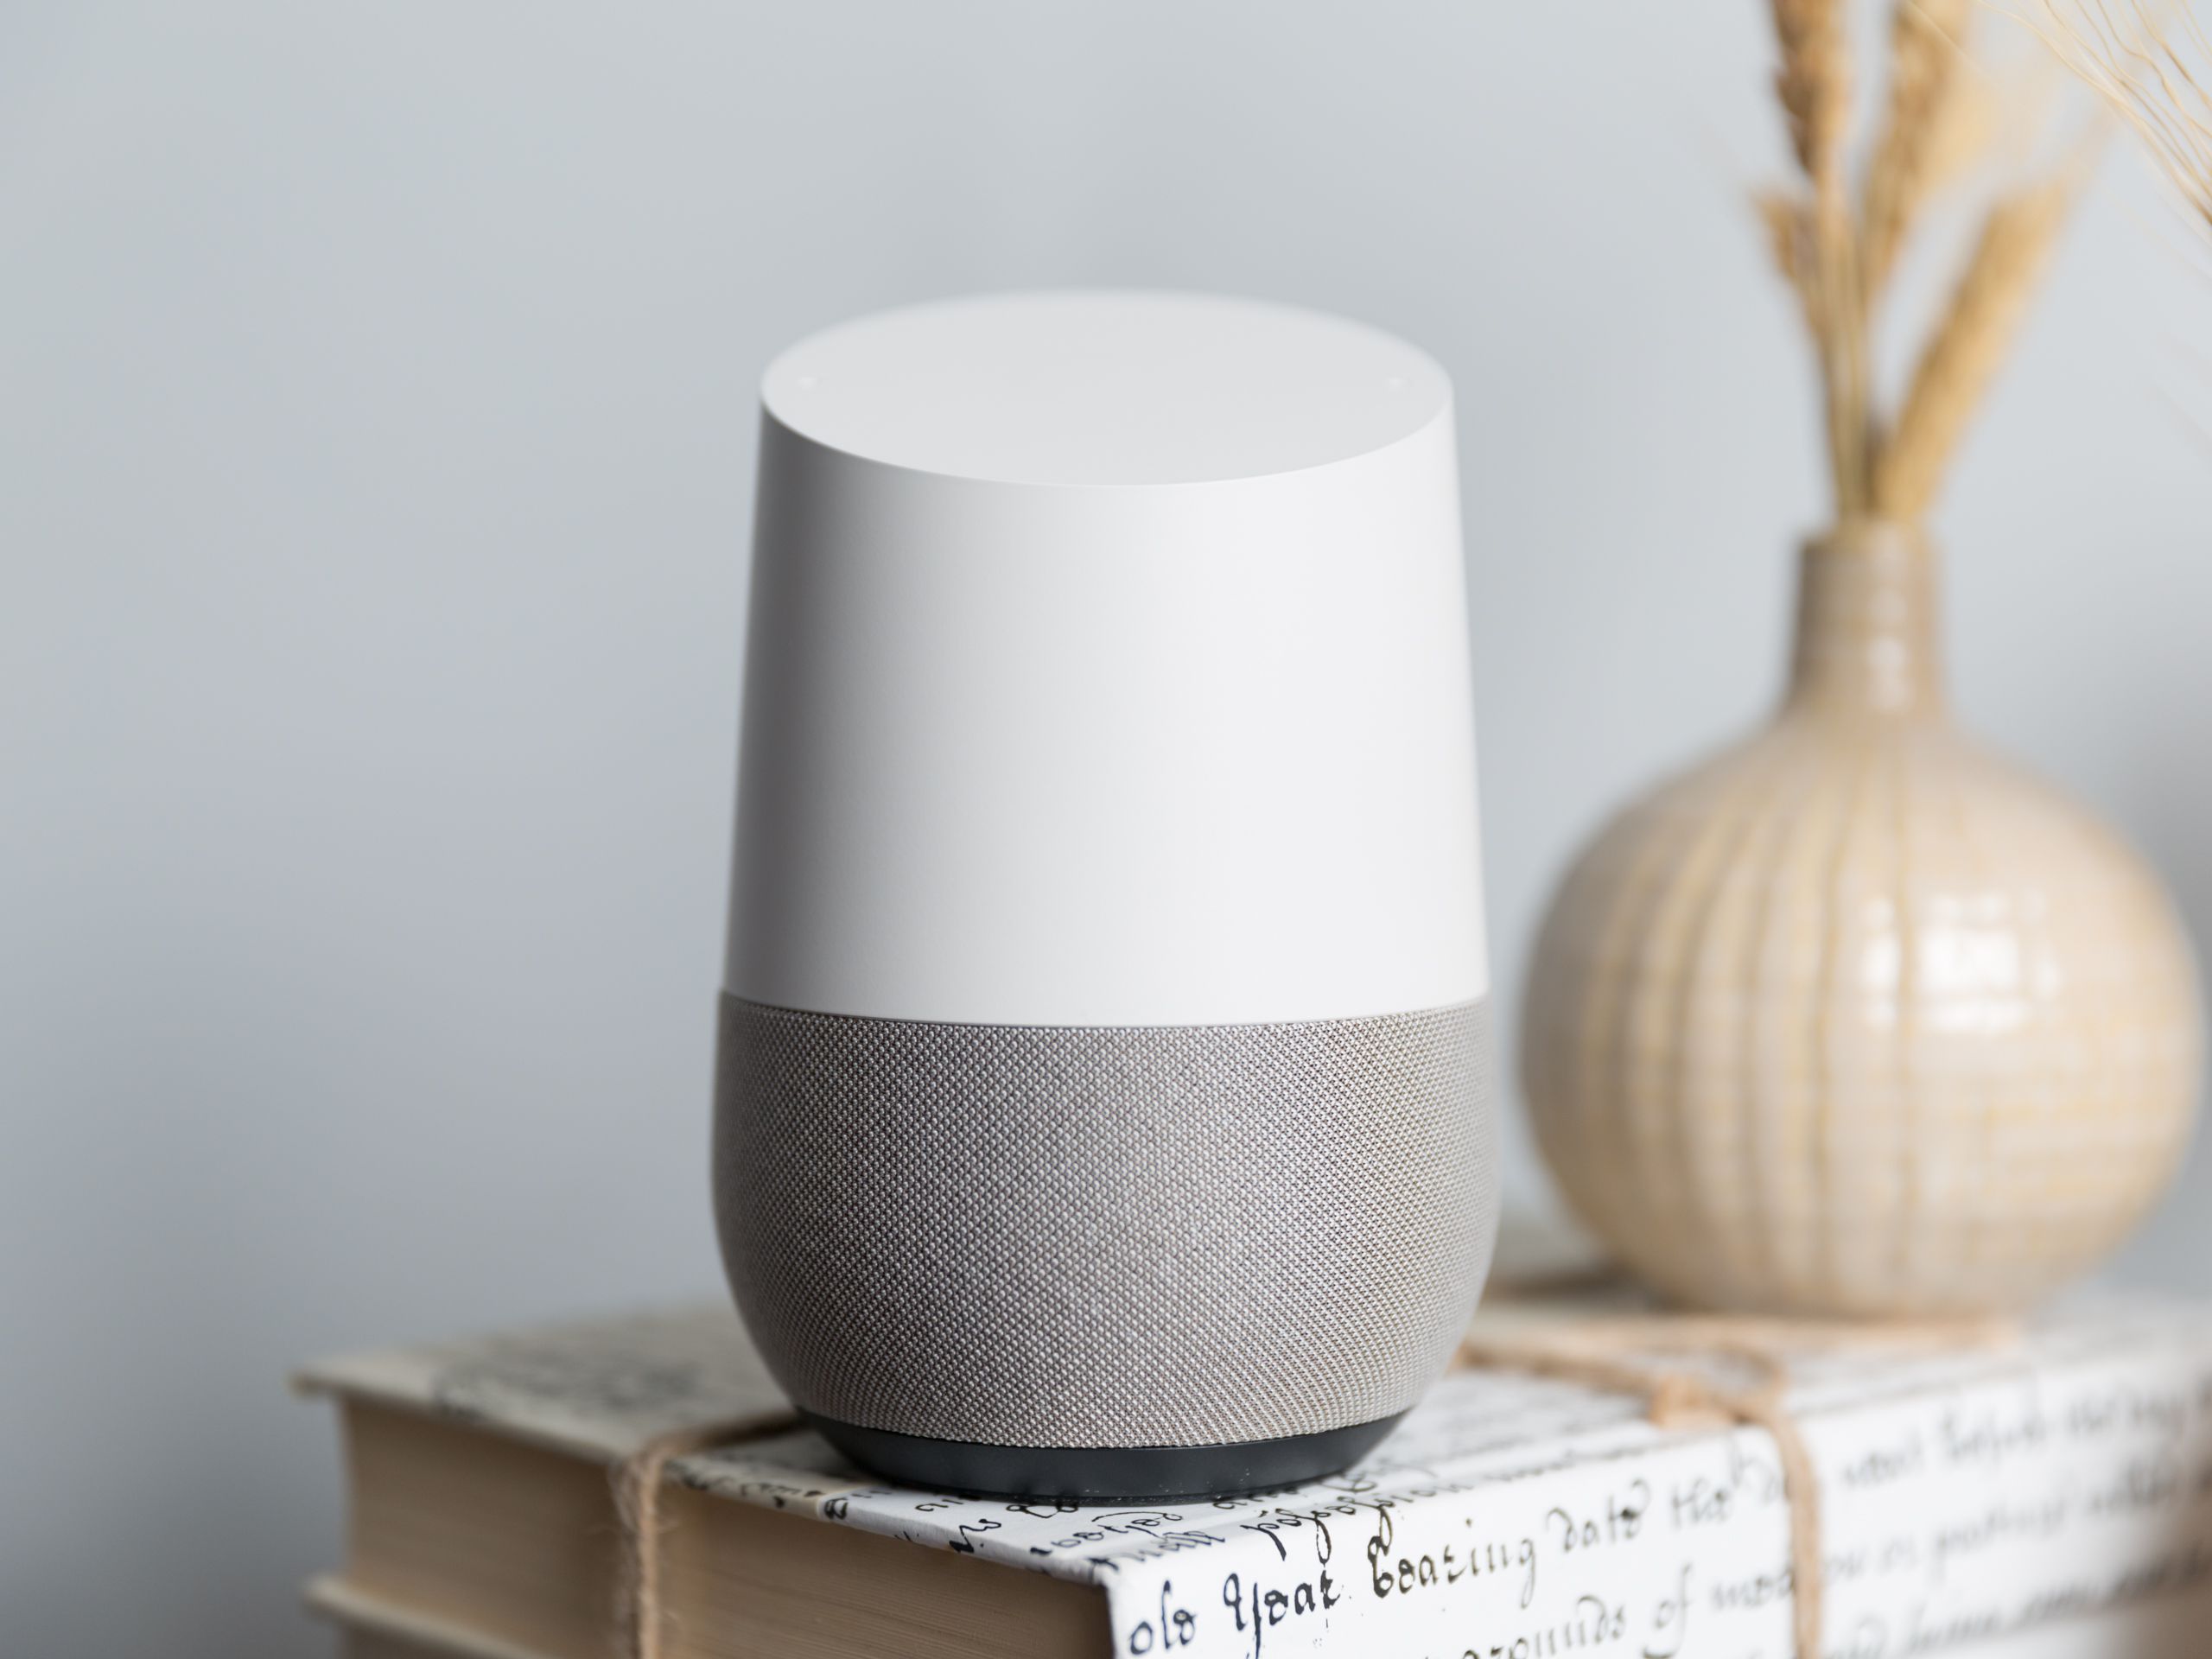 Google home mini from spotify